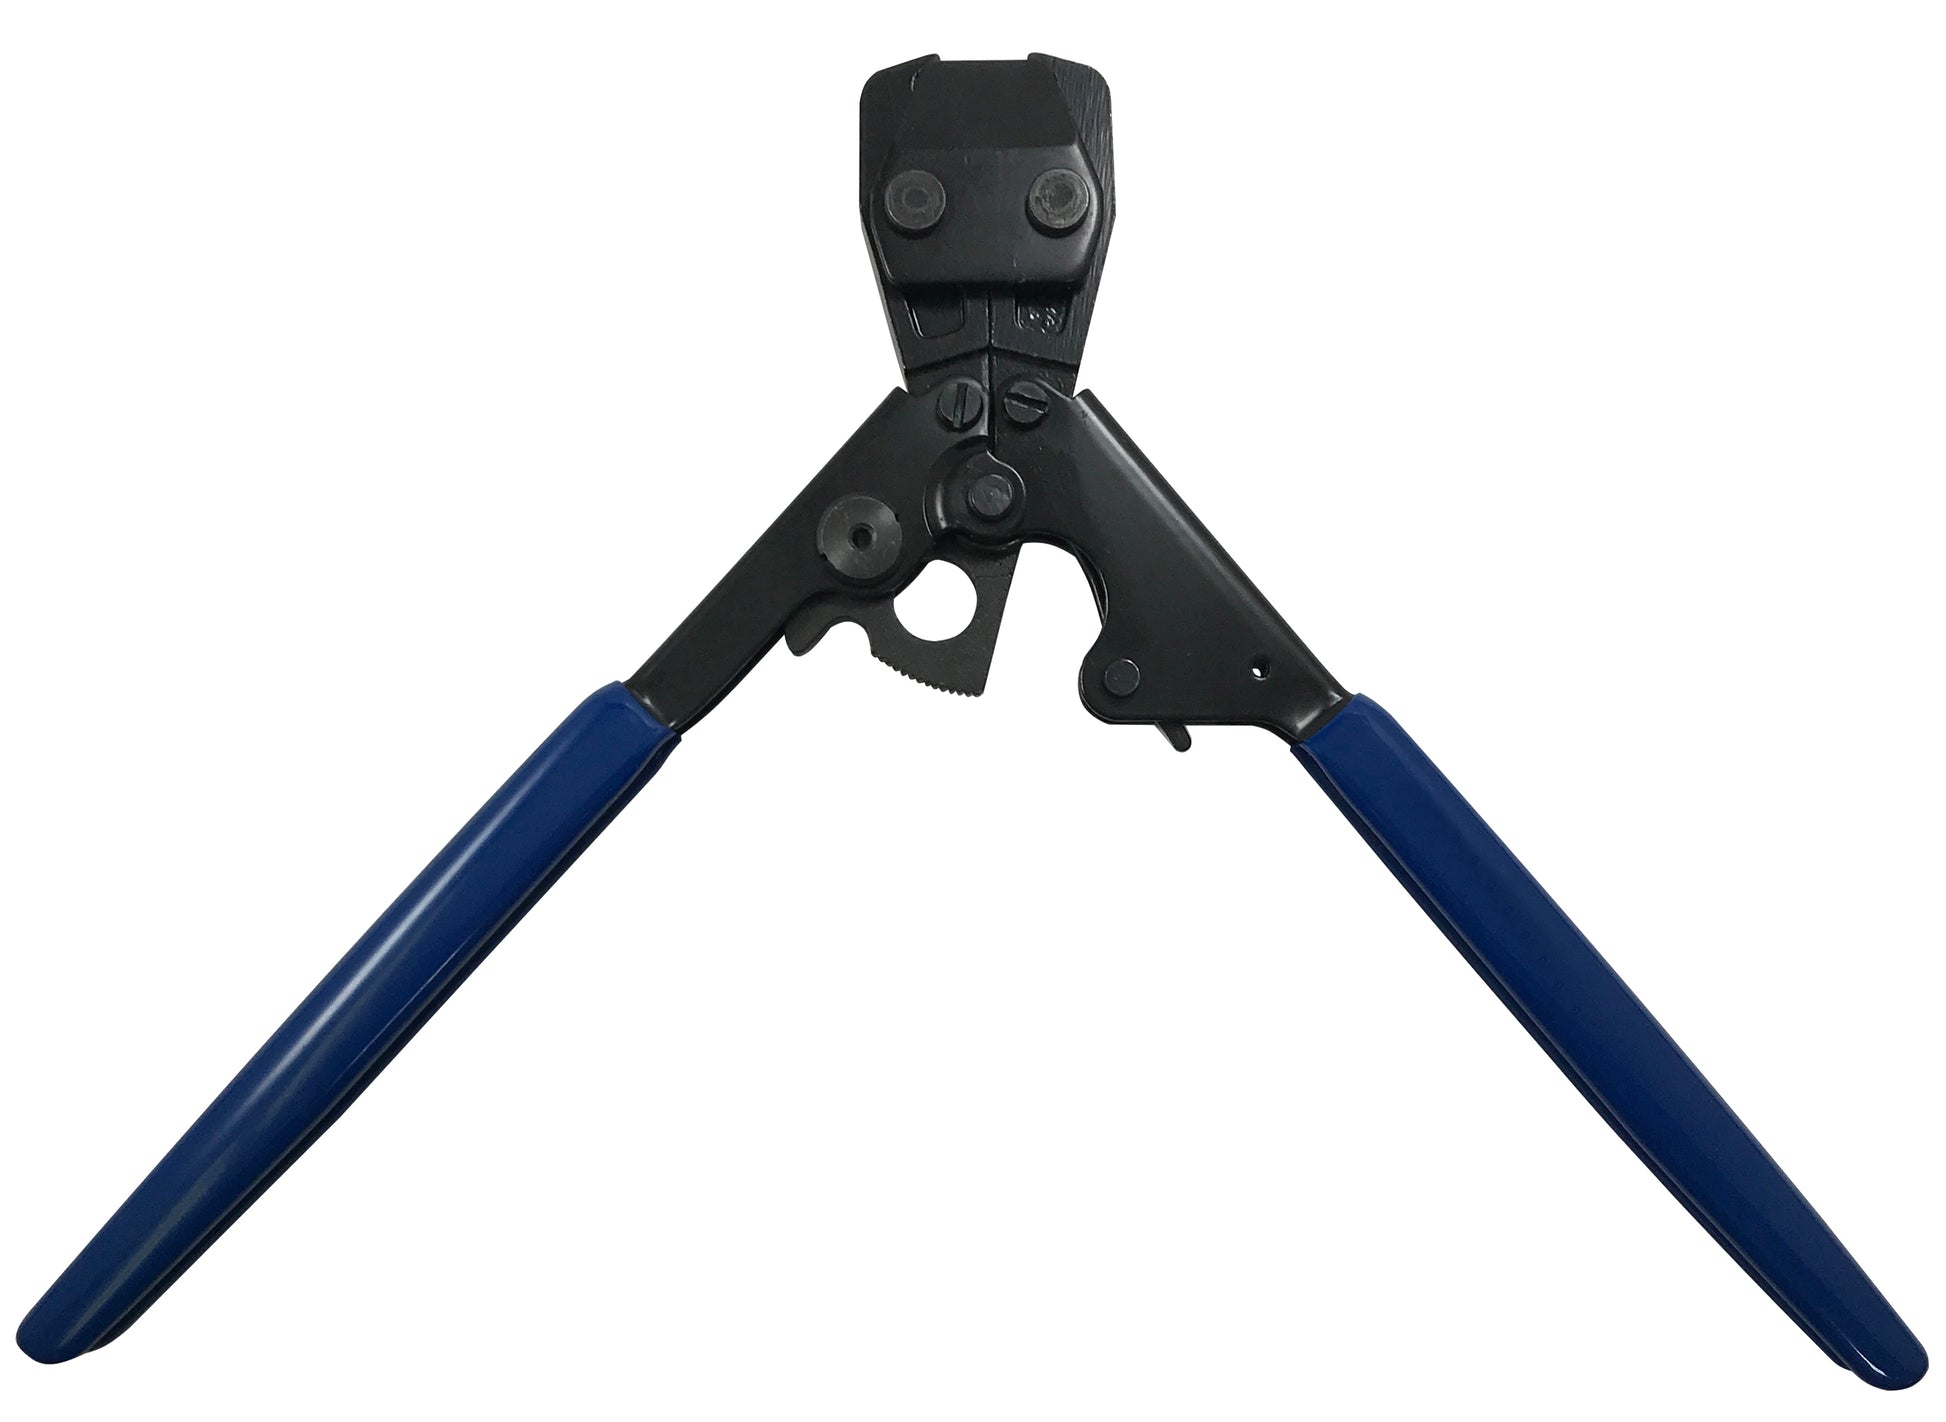 Hand Held Pinch Hose Clamp Crimper Pliers Tool